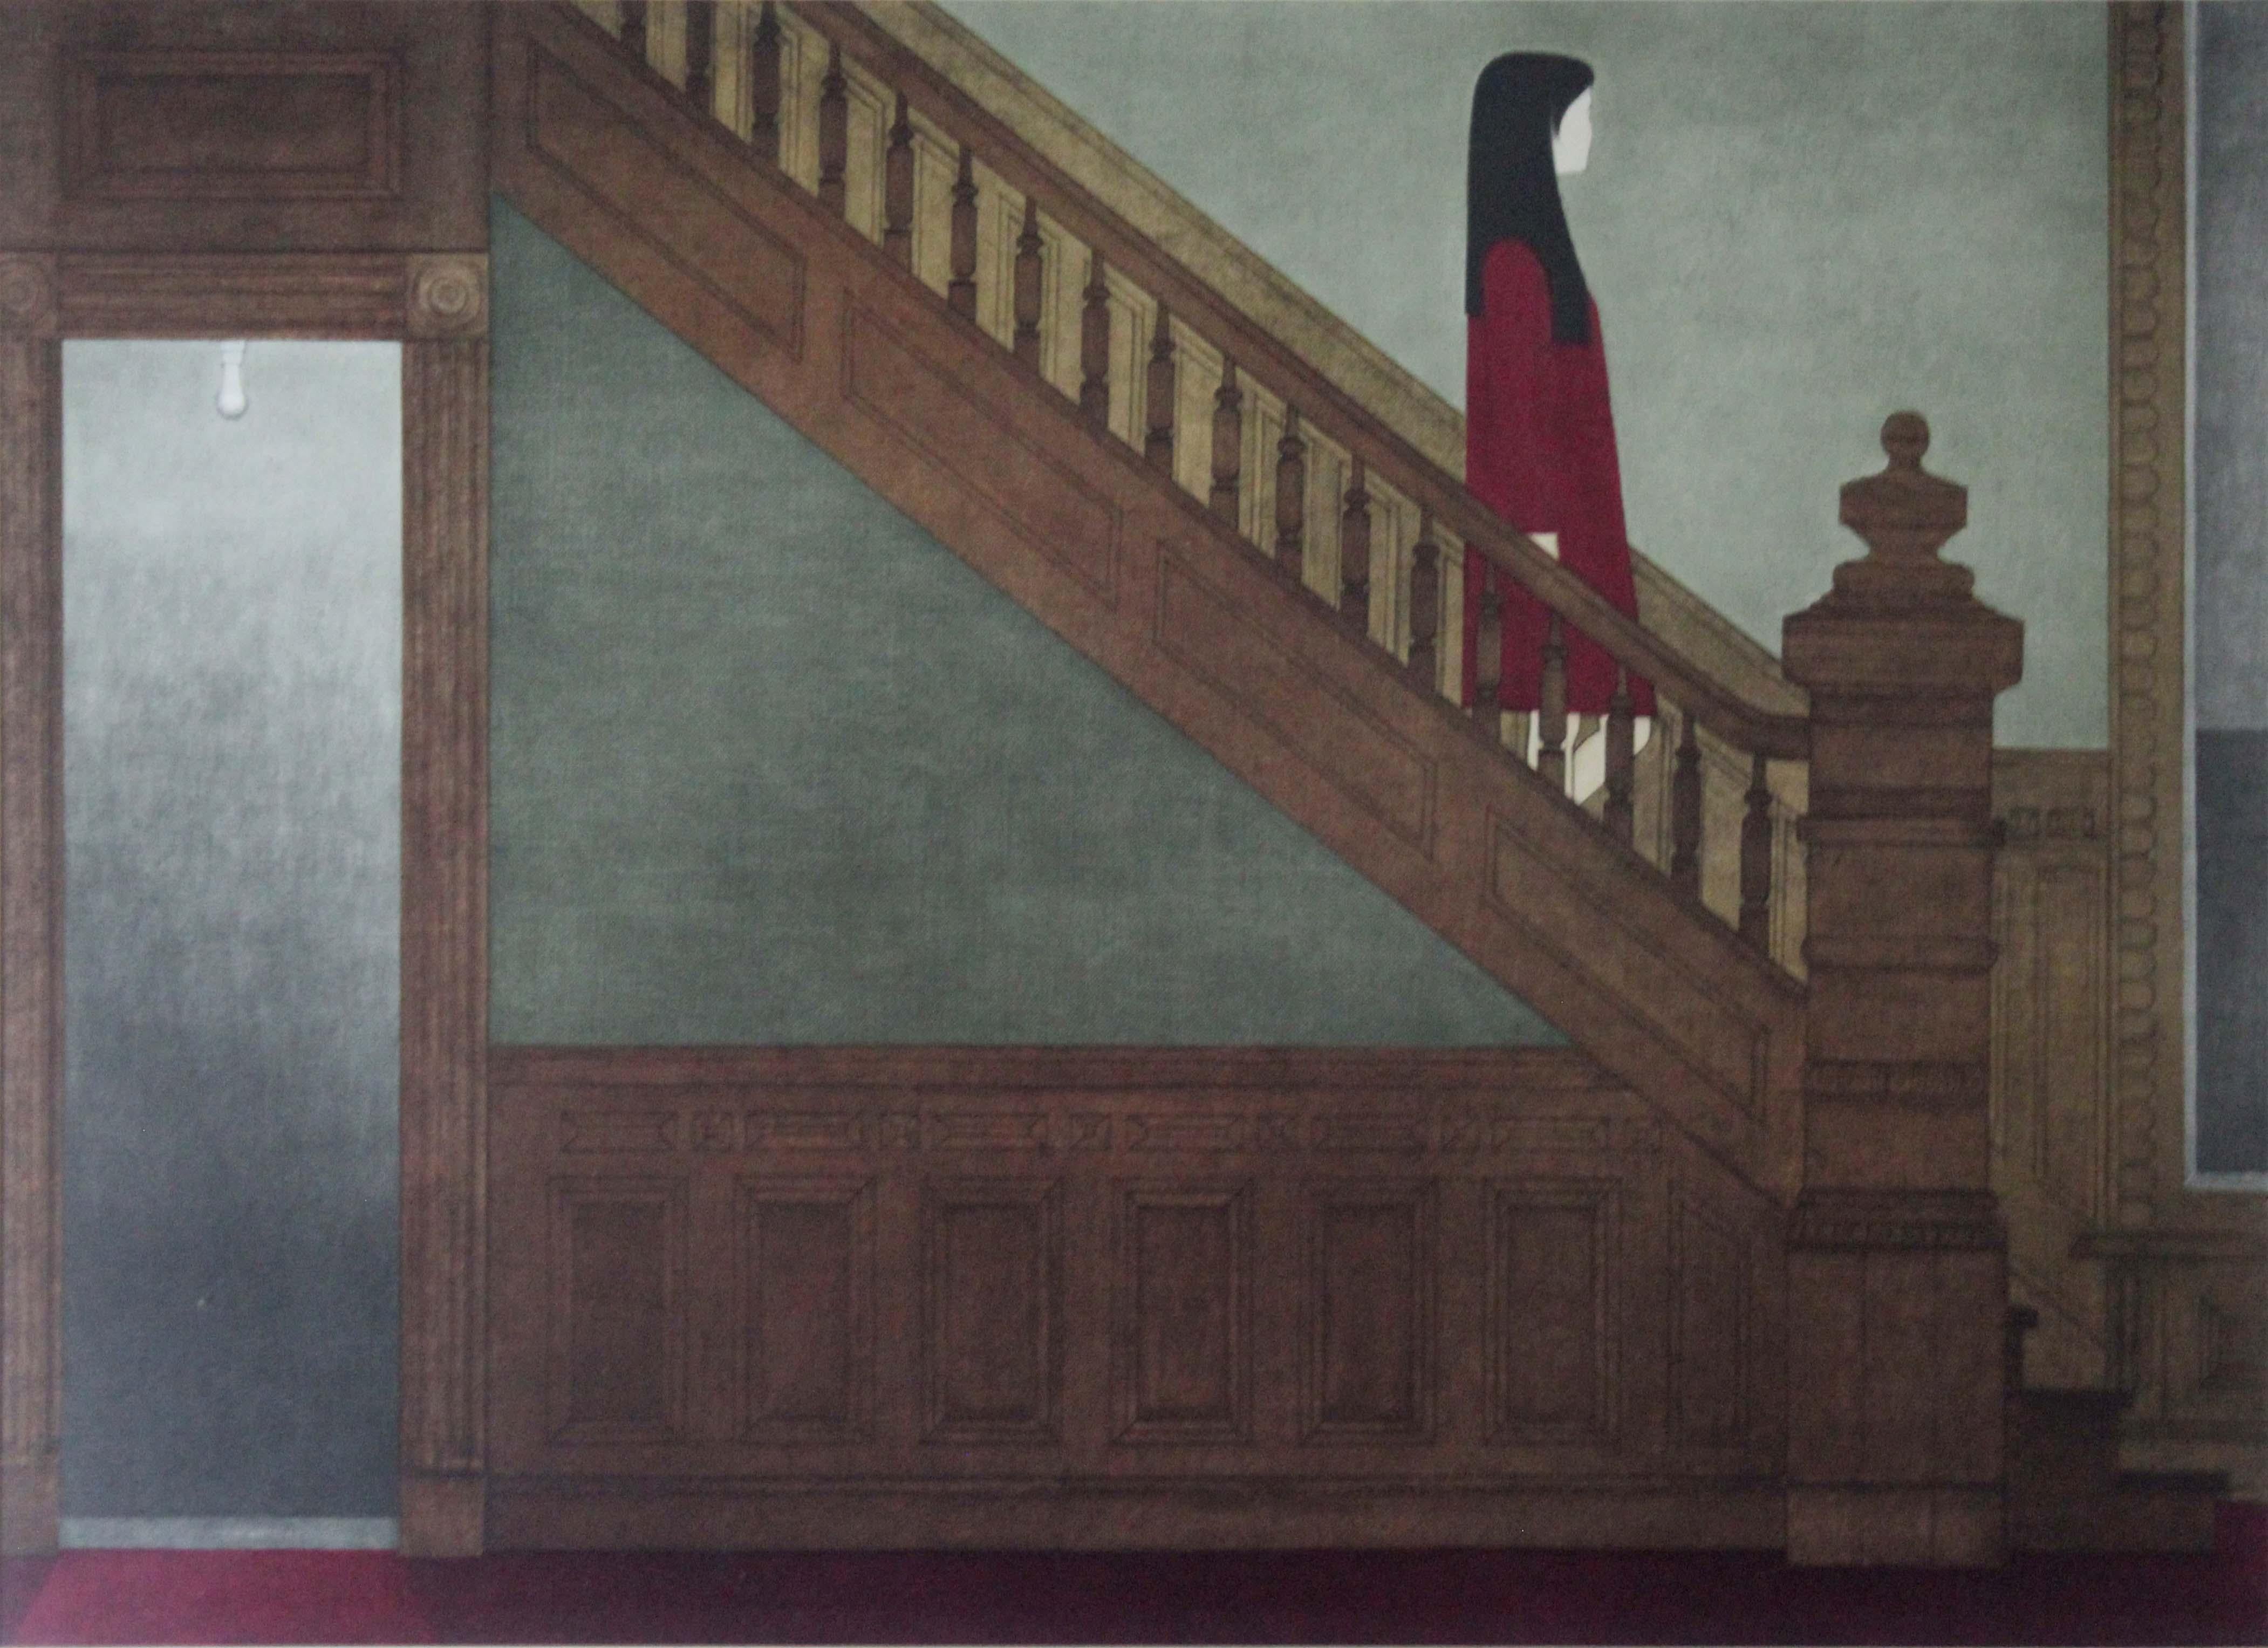 A dreamlike collotype print titled Stairway by American Artist Will Barnet. From NY Graphic Society in 1970. Will Barnet (1911-2012) was an American artist known for his paintings, watercolors, drawings, and prints depicting the human figure and